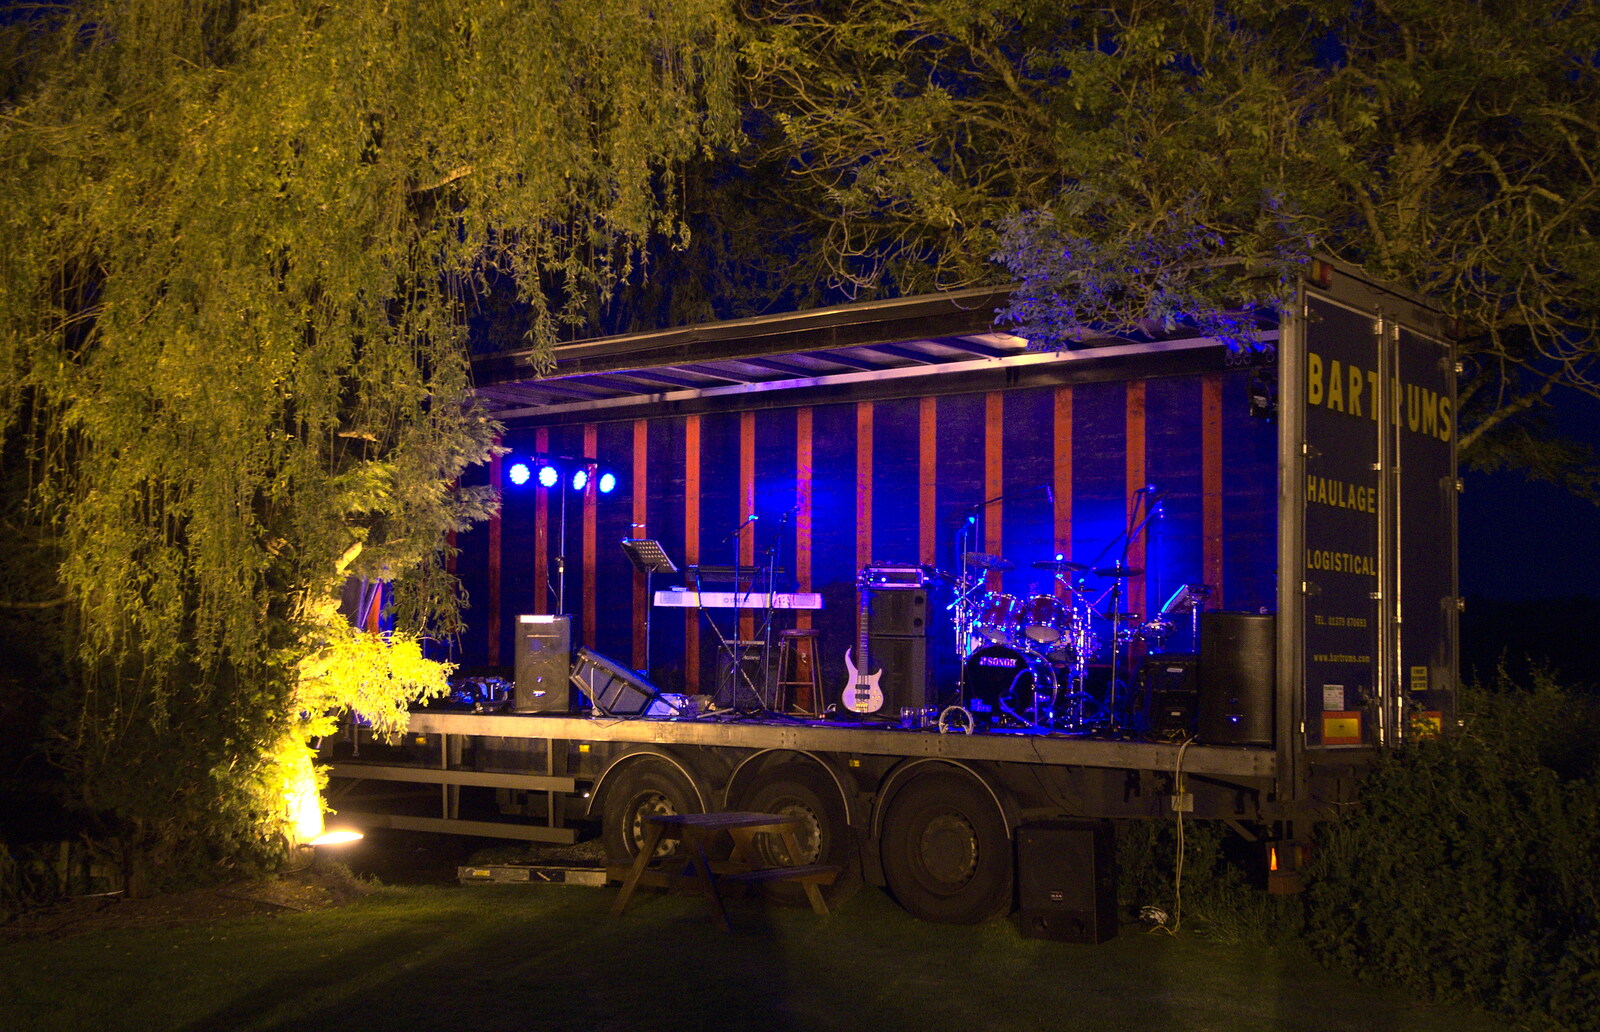 The BBs at the White Hart, Roydon, Norfolk - 1st June 2012: The stage looks quite good at night